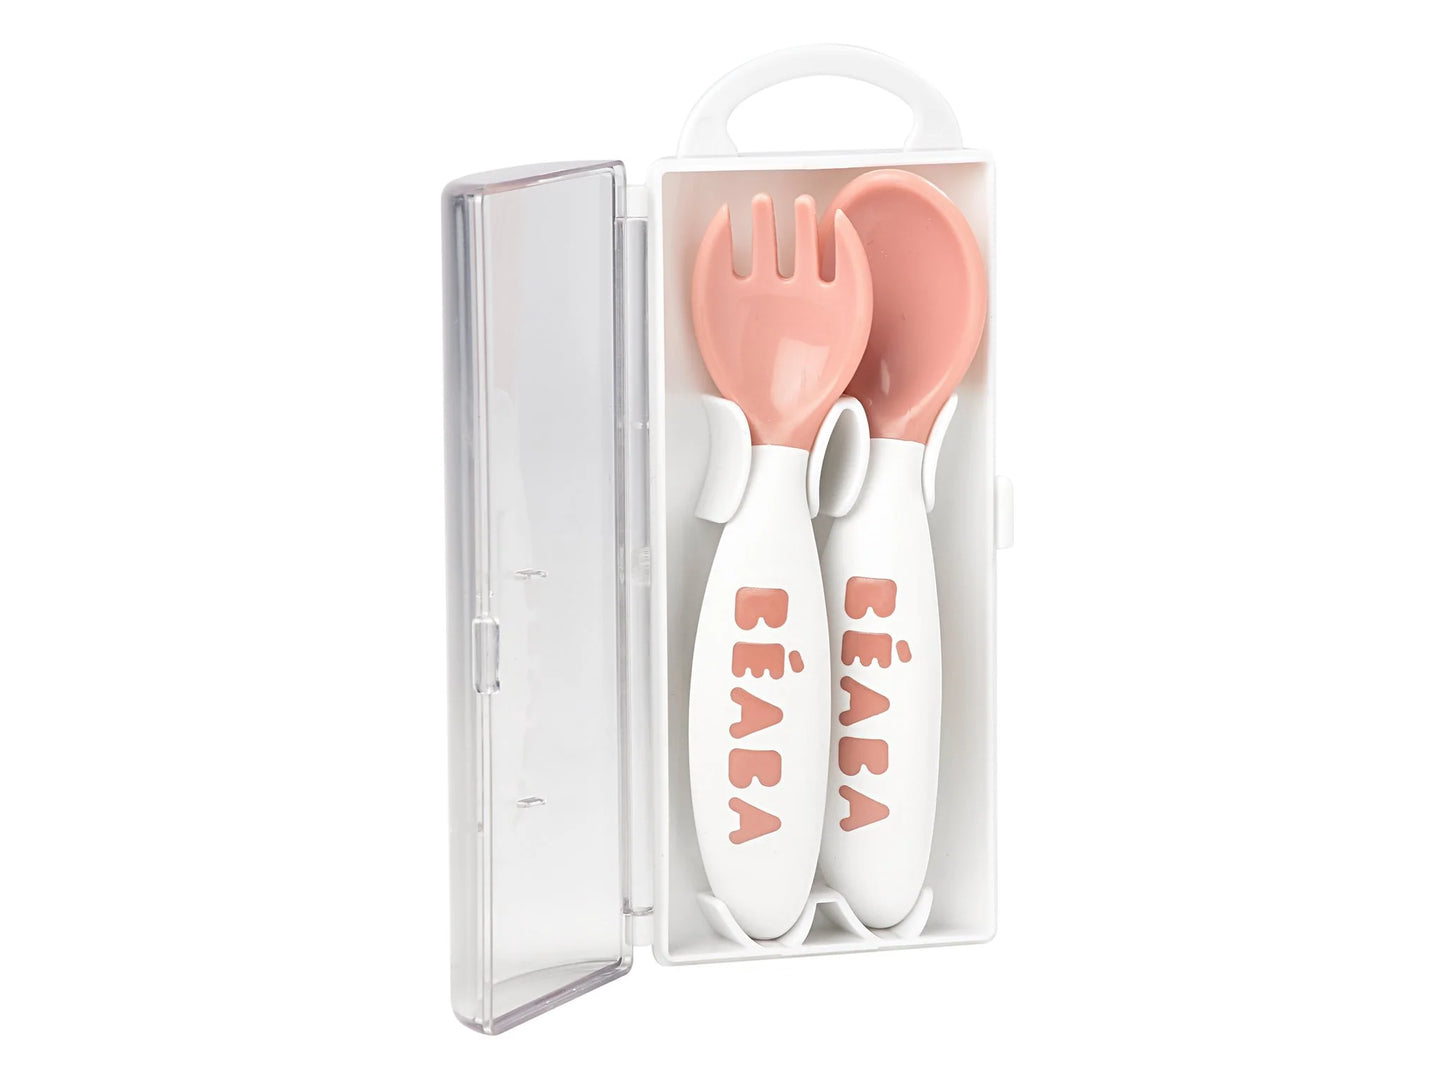 Beaba 2nd Age Training Spoon and Fork Set with Carry Case